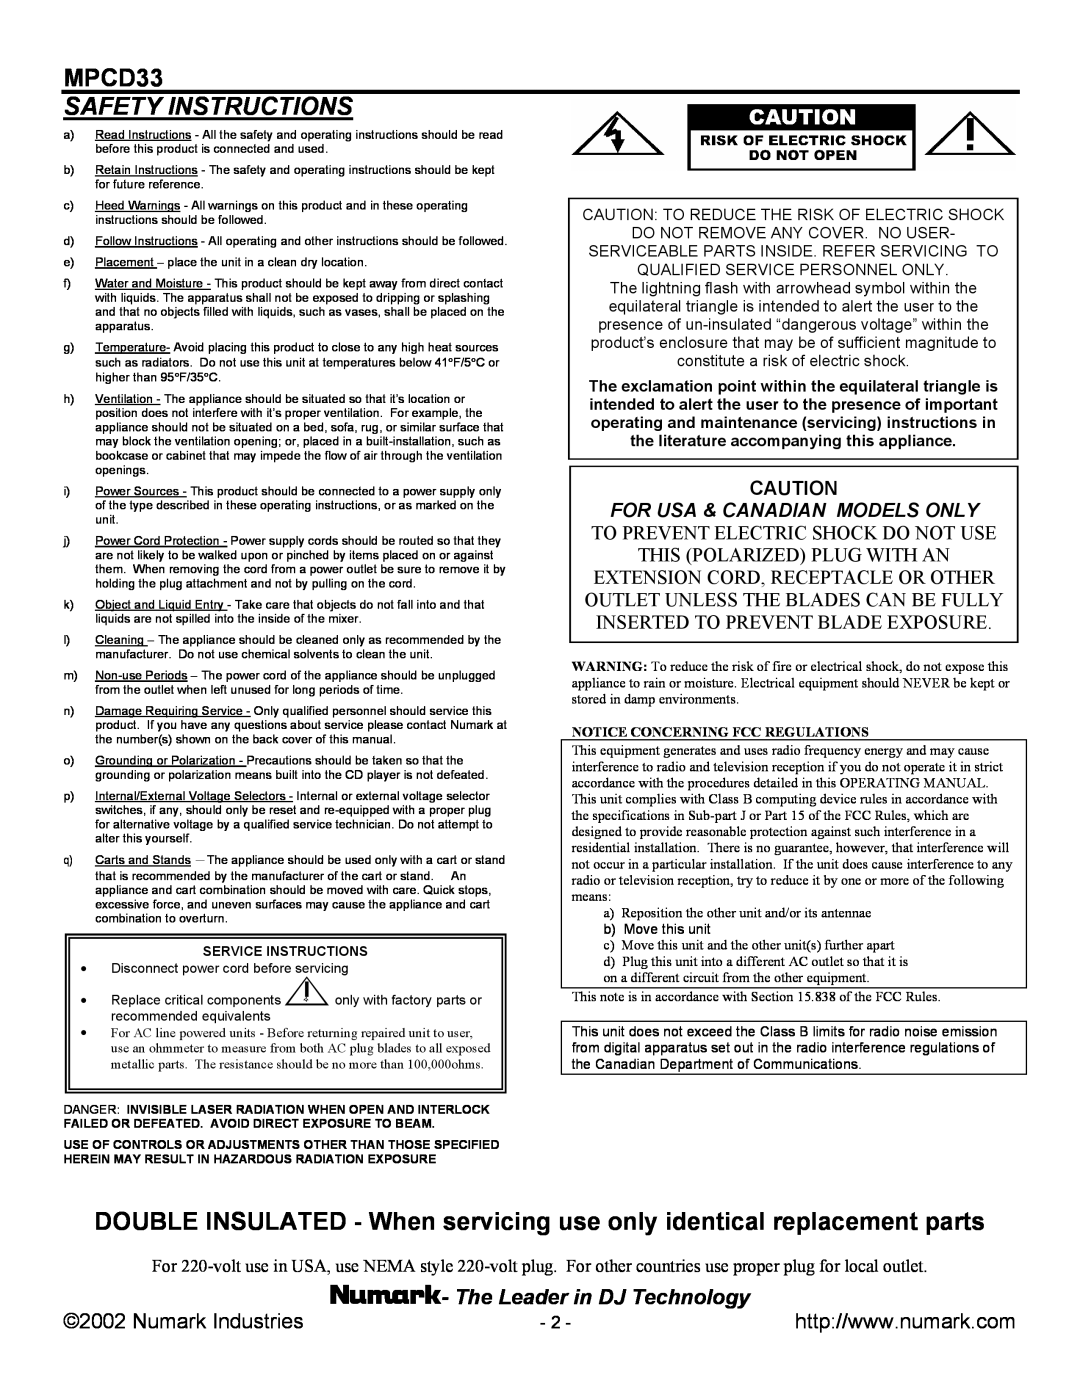 Numark Industries MPCD33 manual Safety Instructions, Numark Industries, The Leader in DJ Technology 